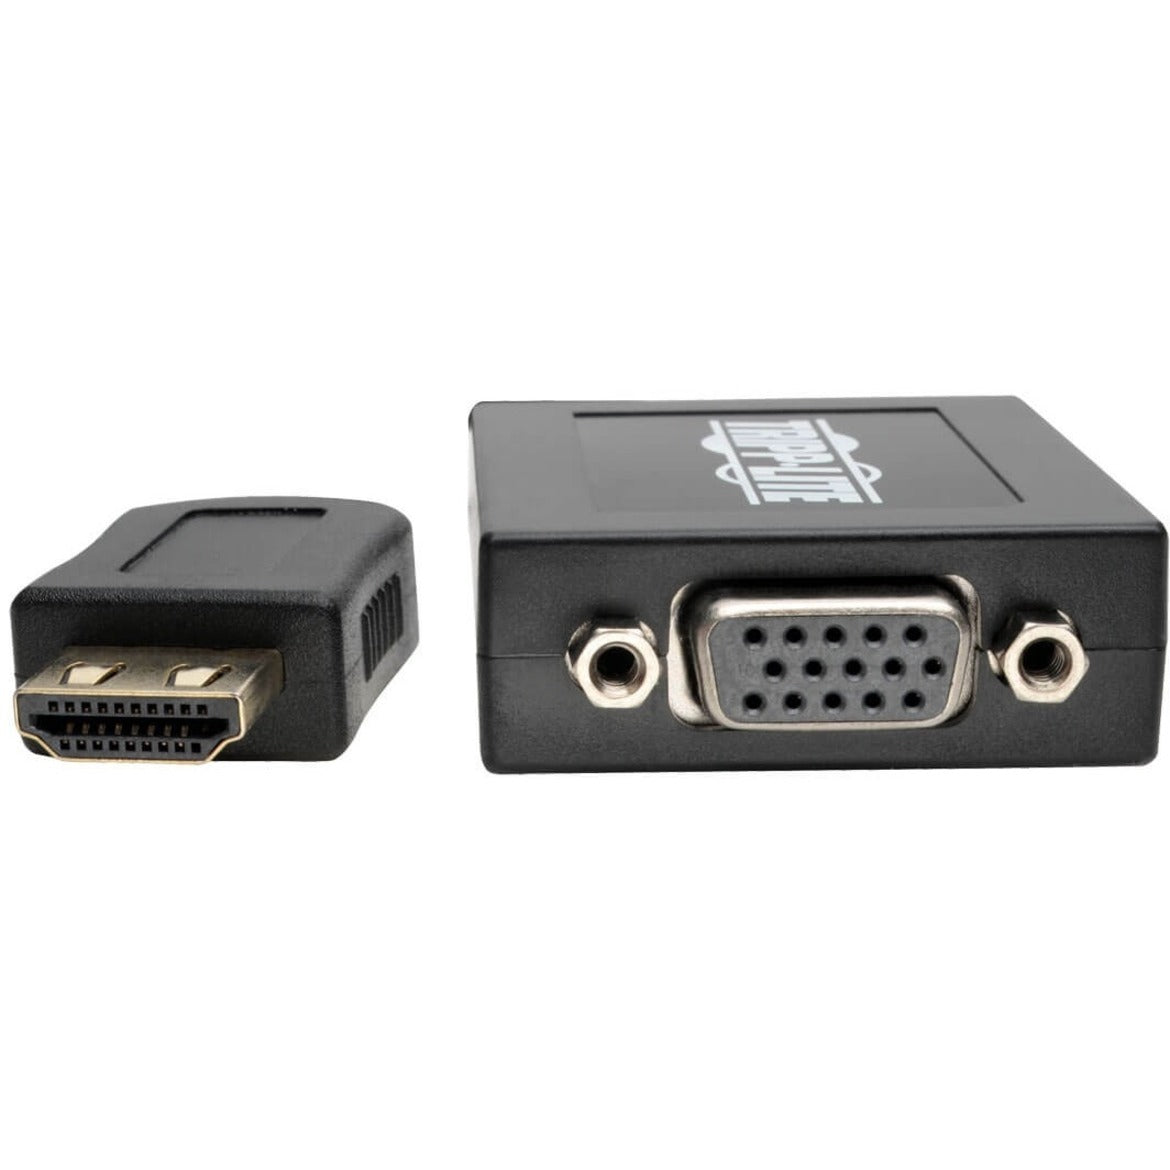 Tripp Lite P131-06N HDMI to VGA + Audio Adapter, 6 In., A/V Cable